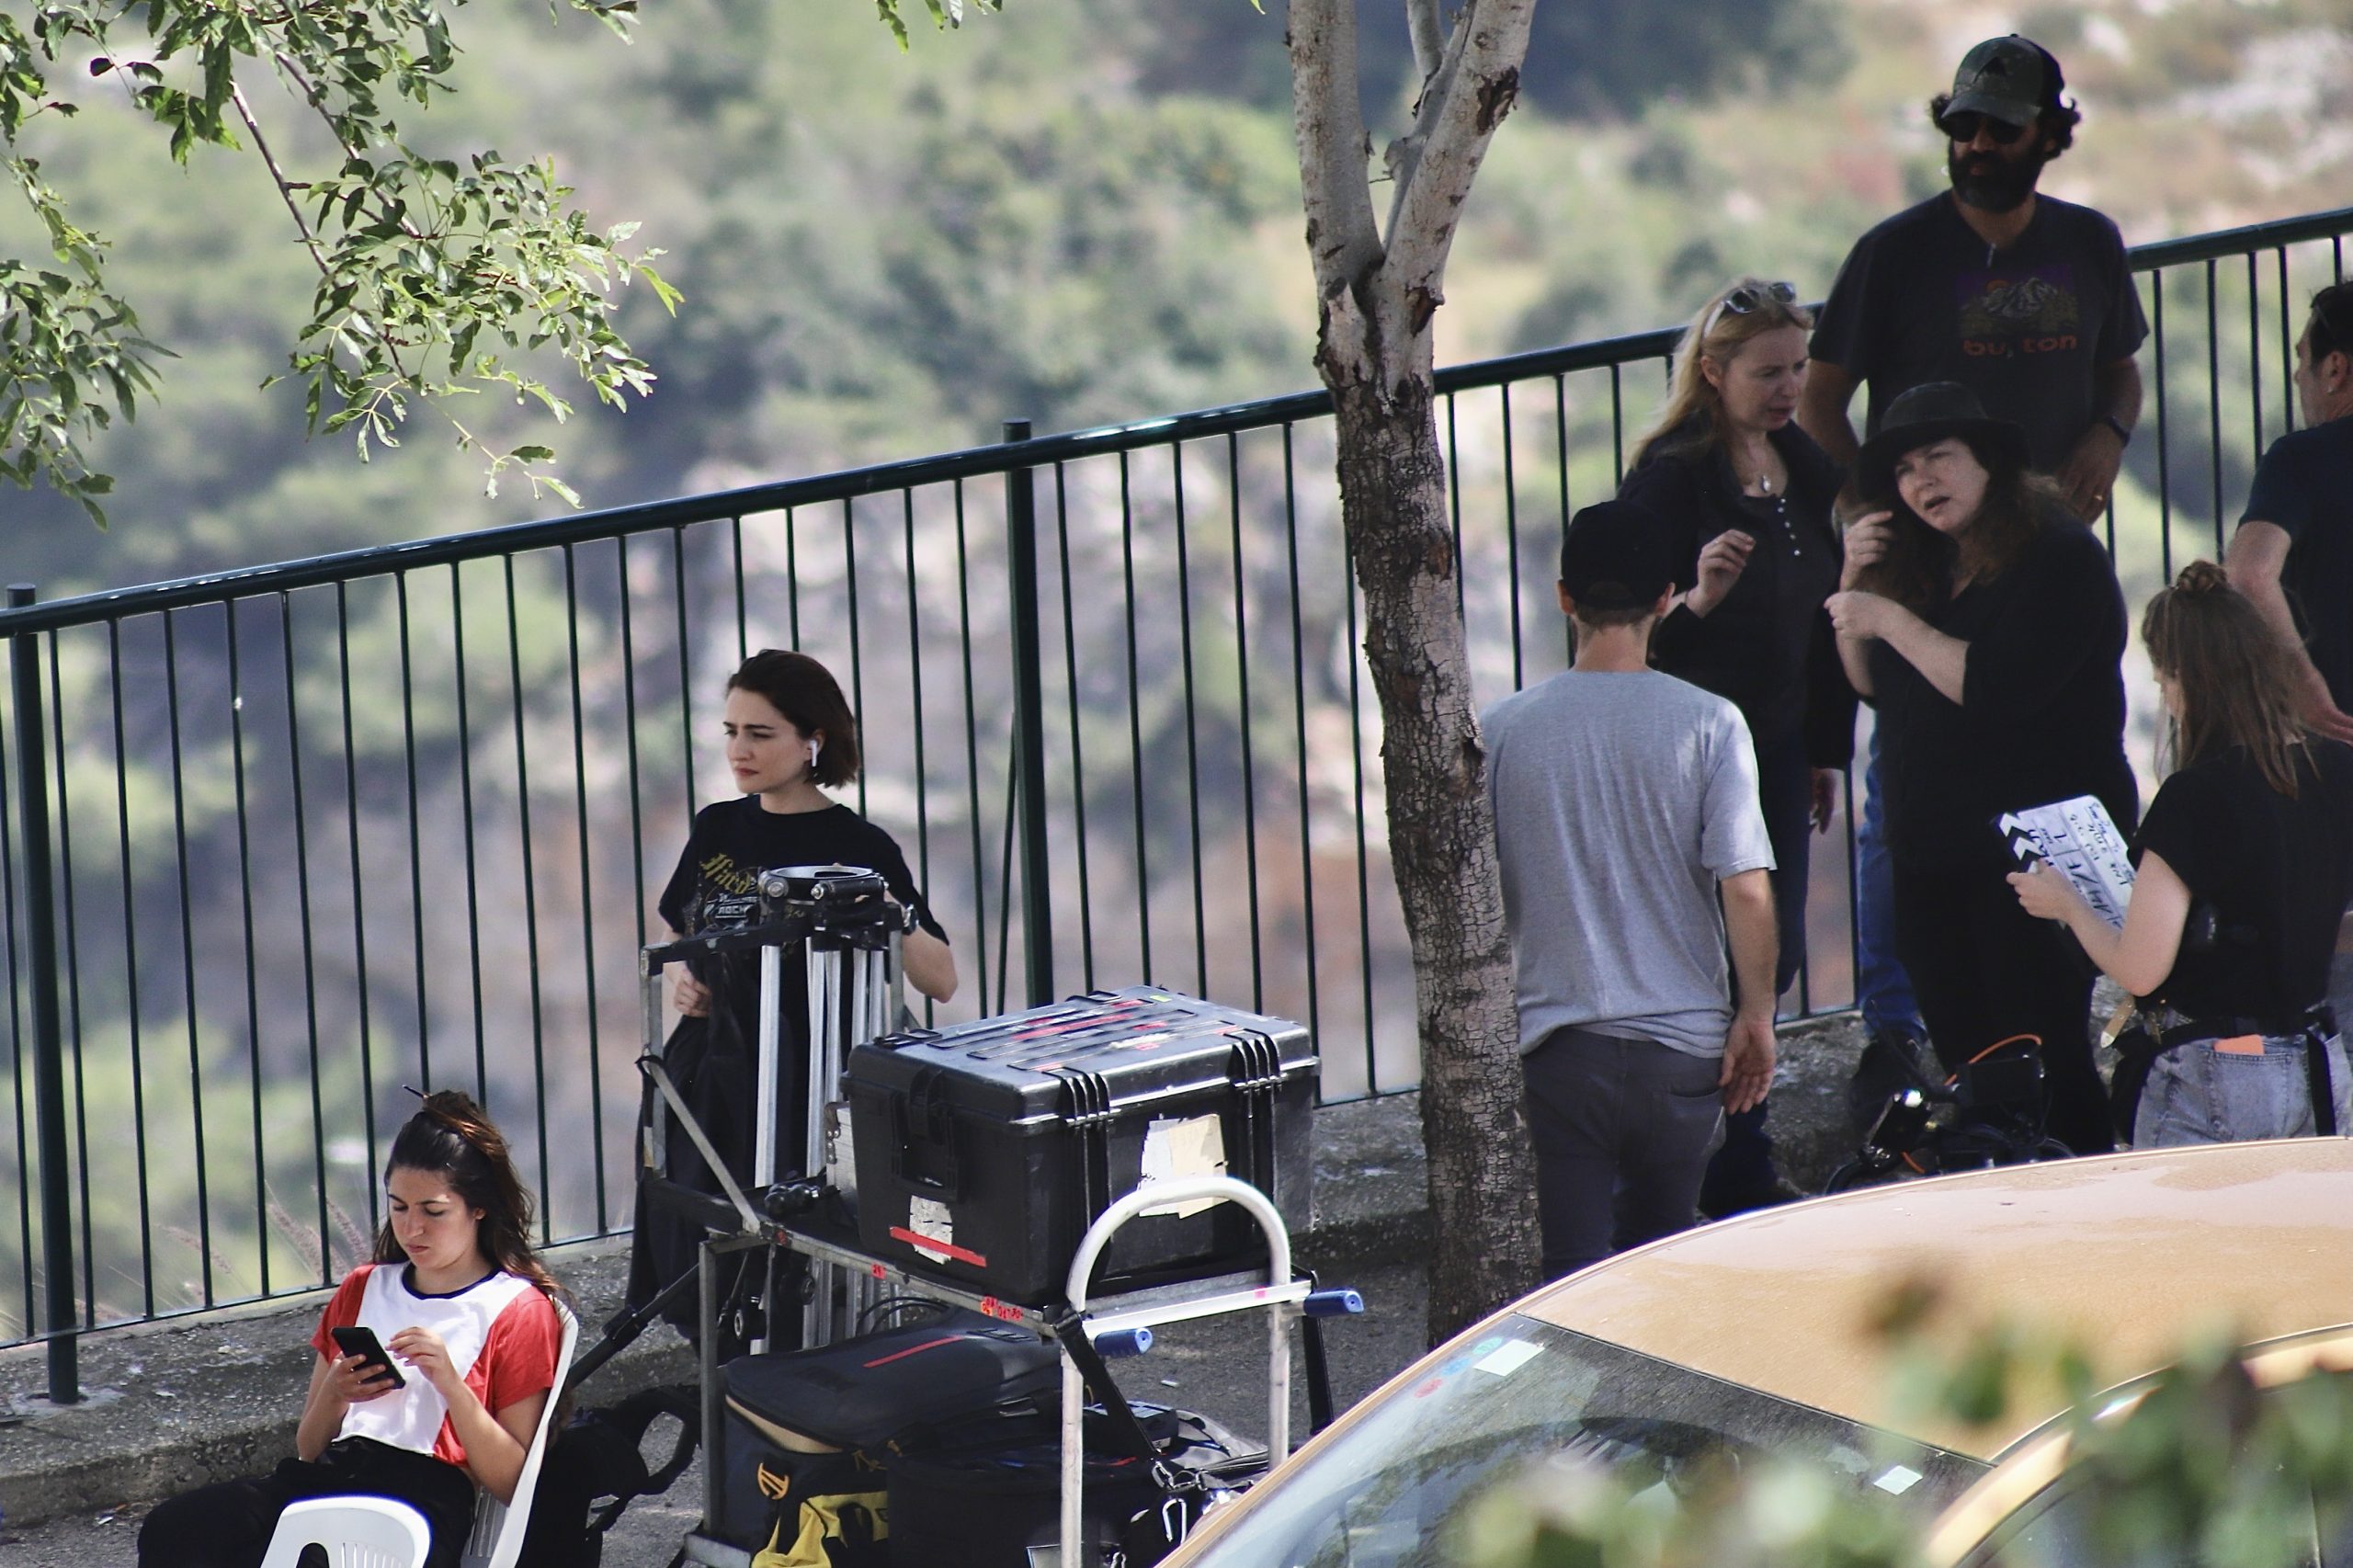 Ania Bukstein, the Israeli actress who played  the Red Priestess in Games of Thrones, at a shooting scene in Haifa